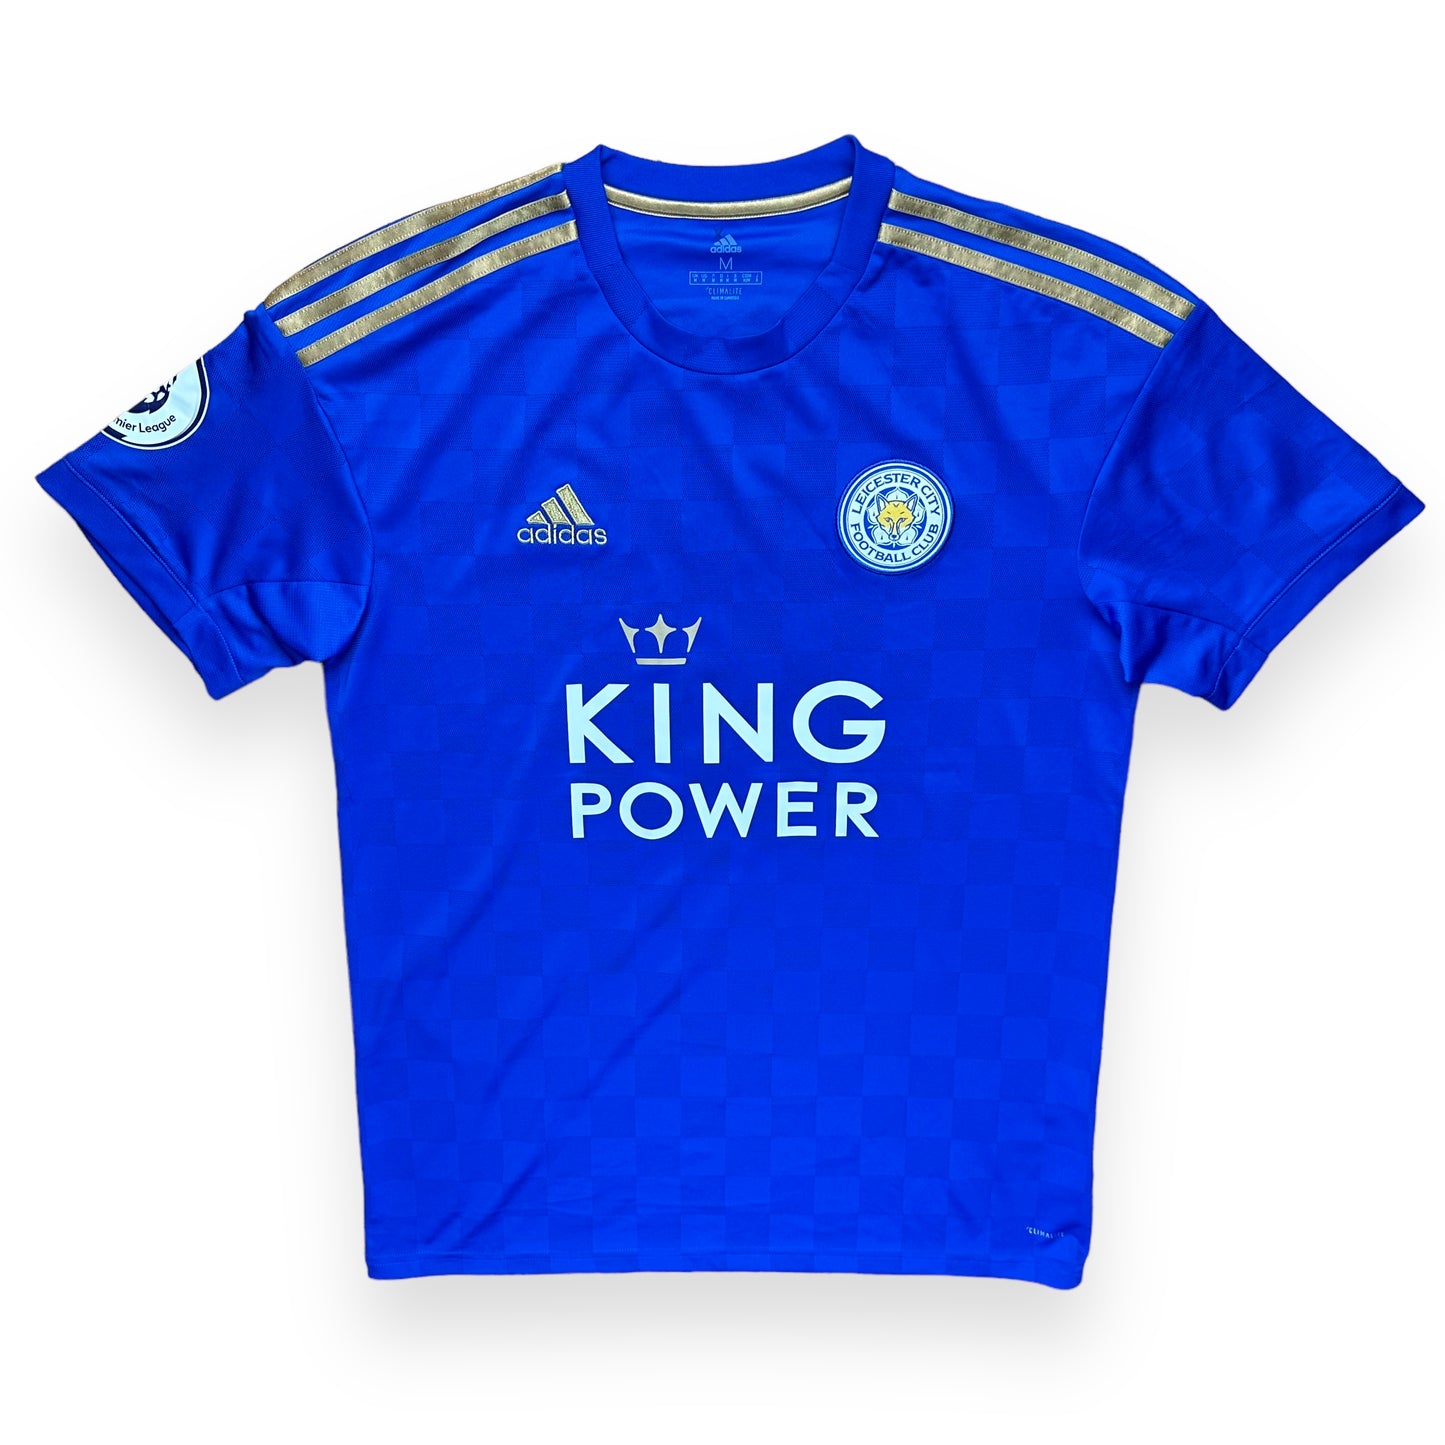 Leicester 2019-20 Home Shirt (M) Vardy #9